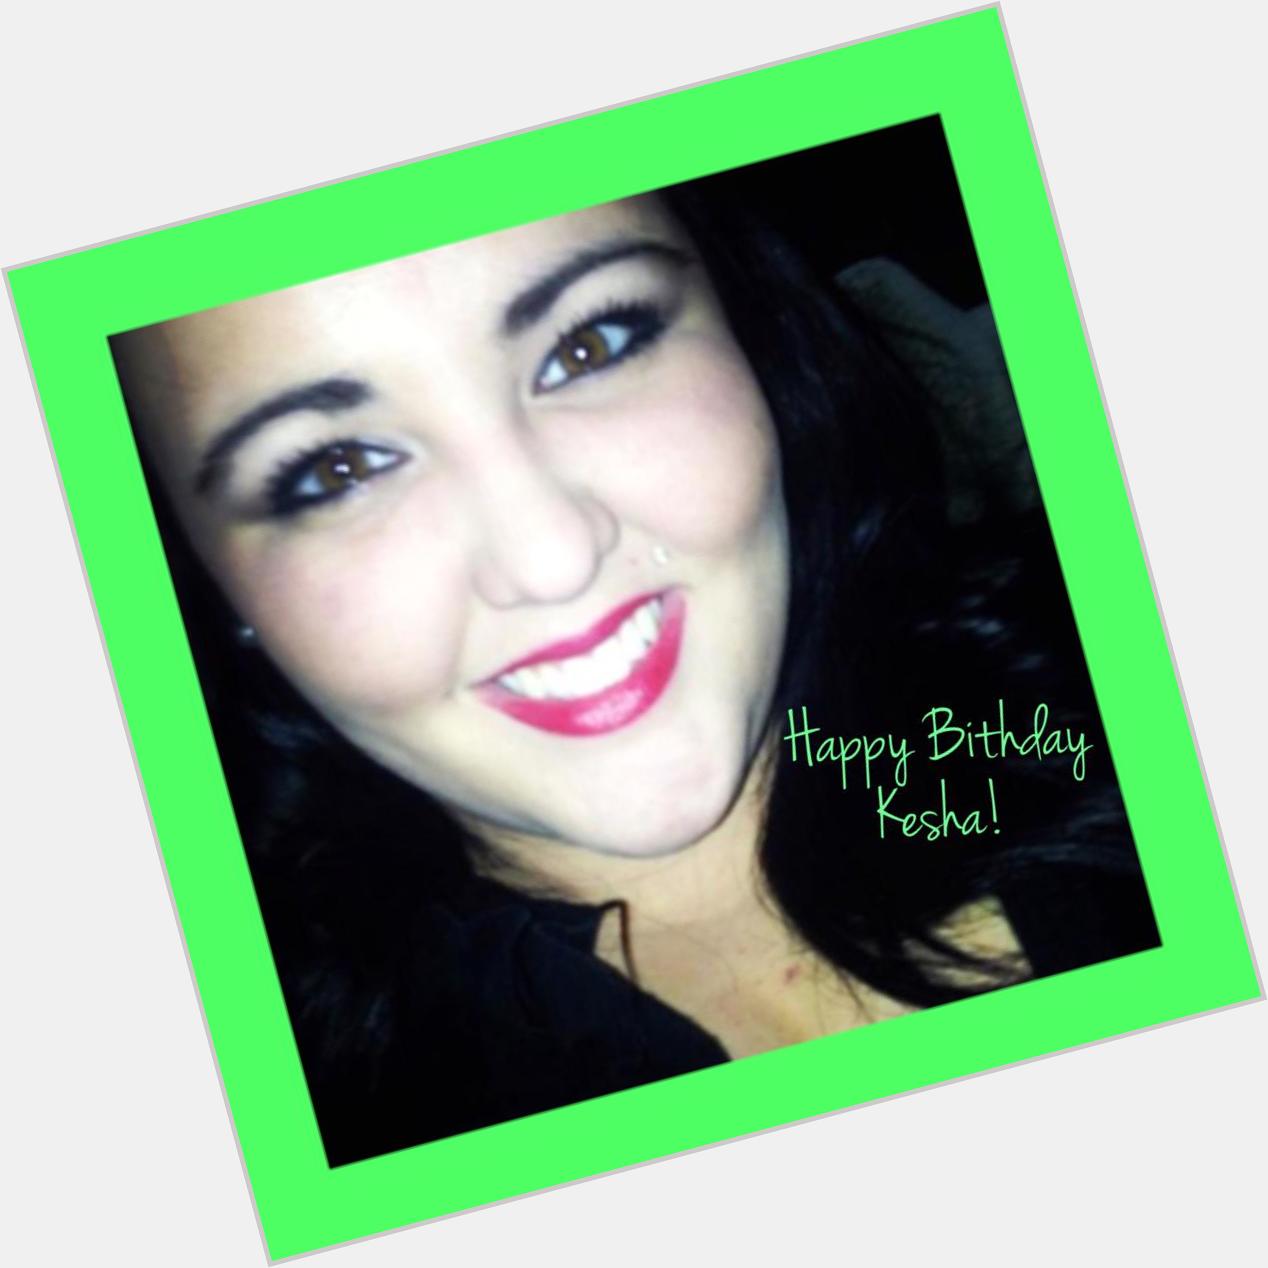 Happy birthday to our fabulous sister, Kesha! We love you!   